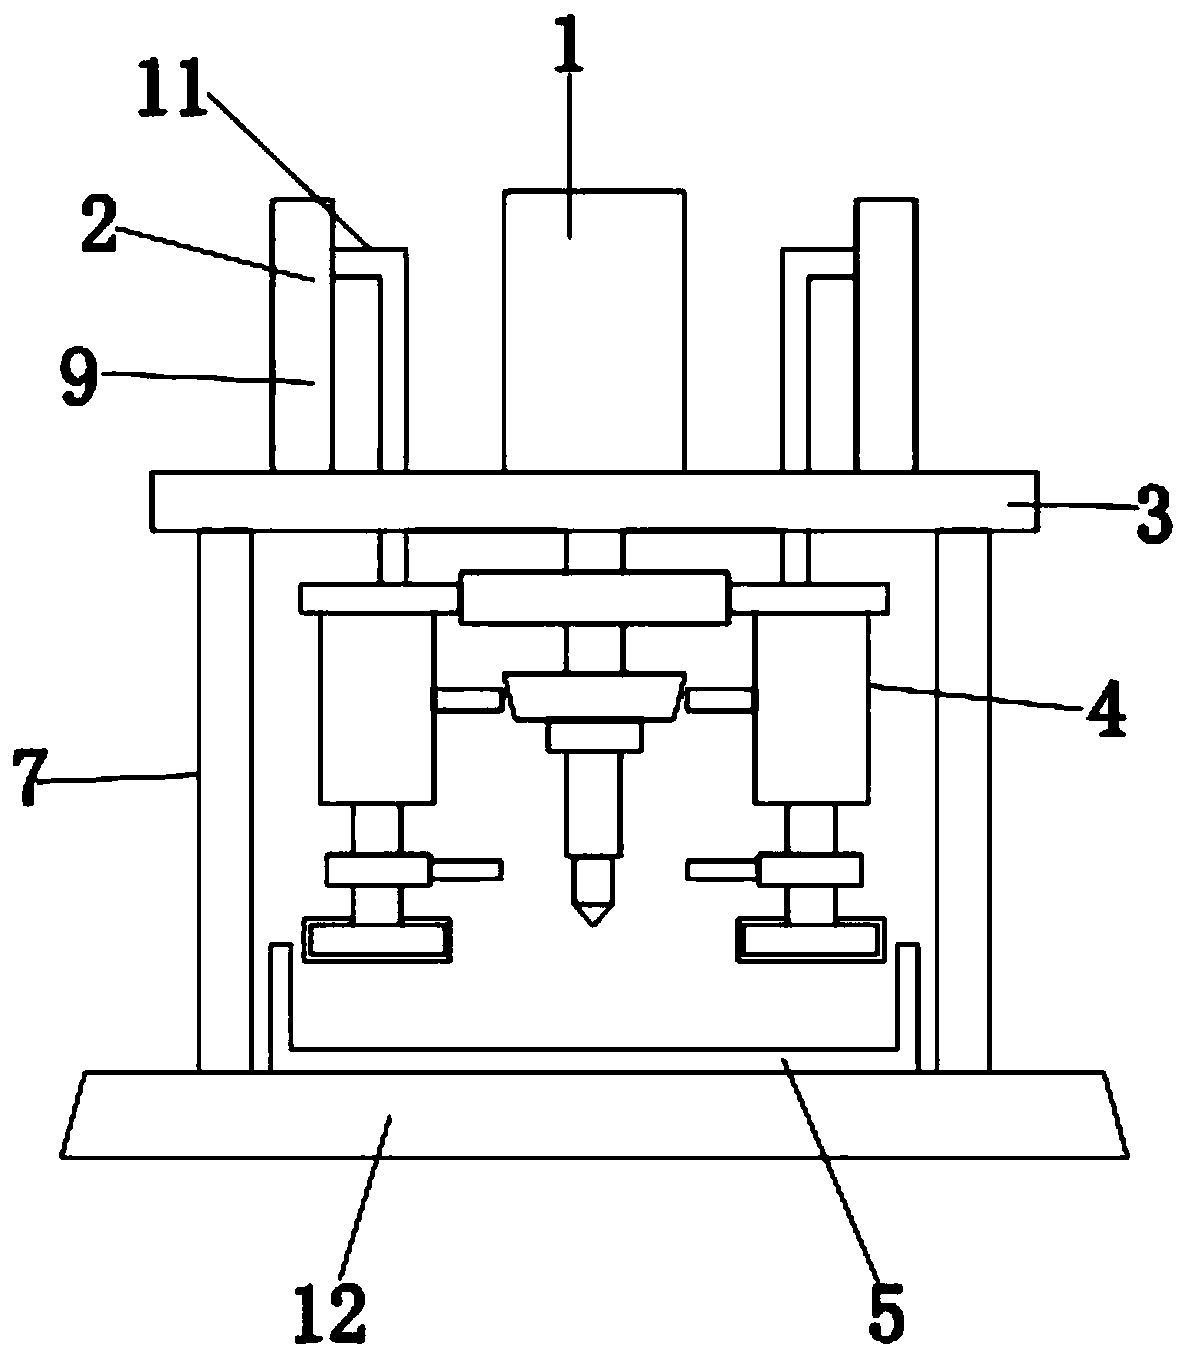 Drilling device for garment production